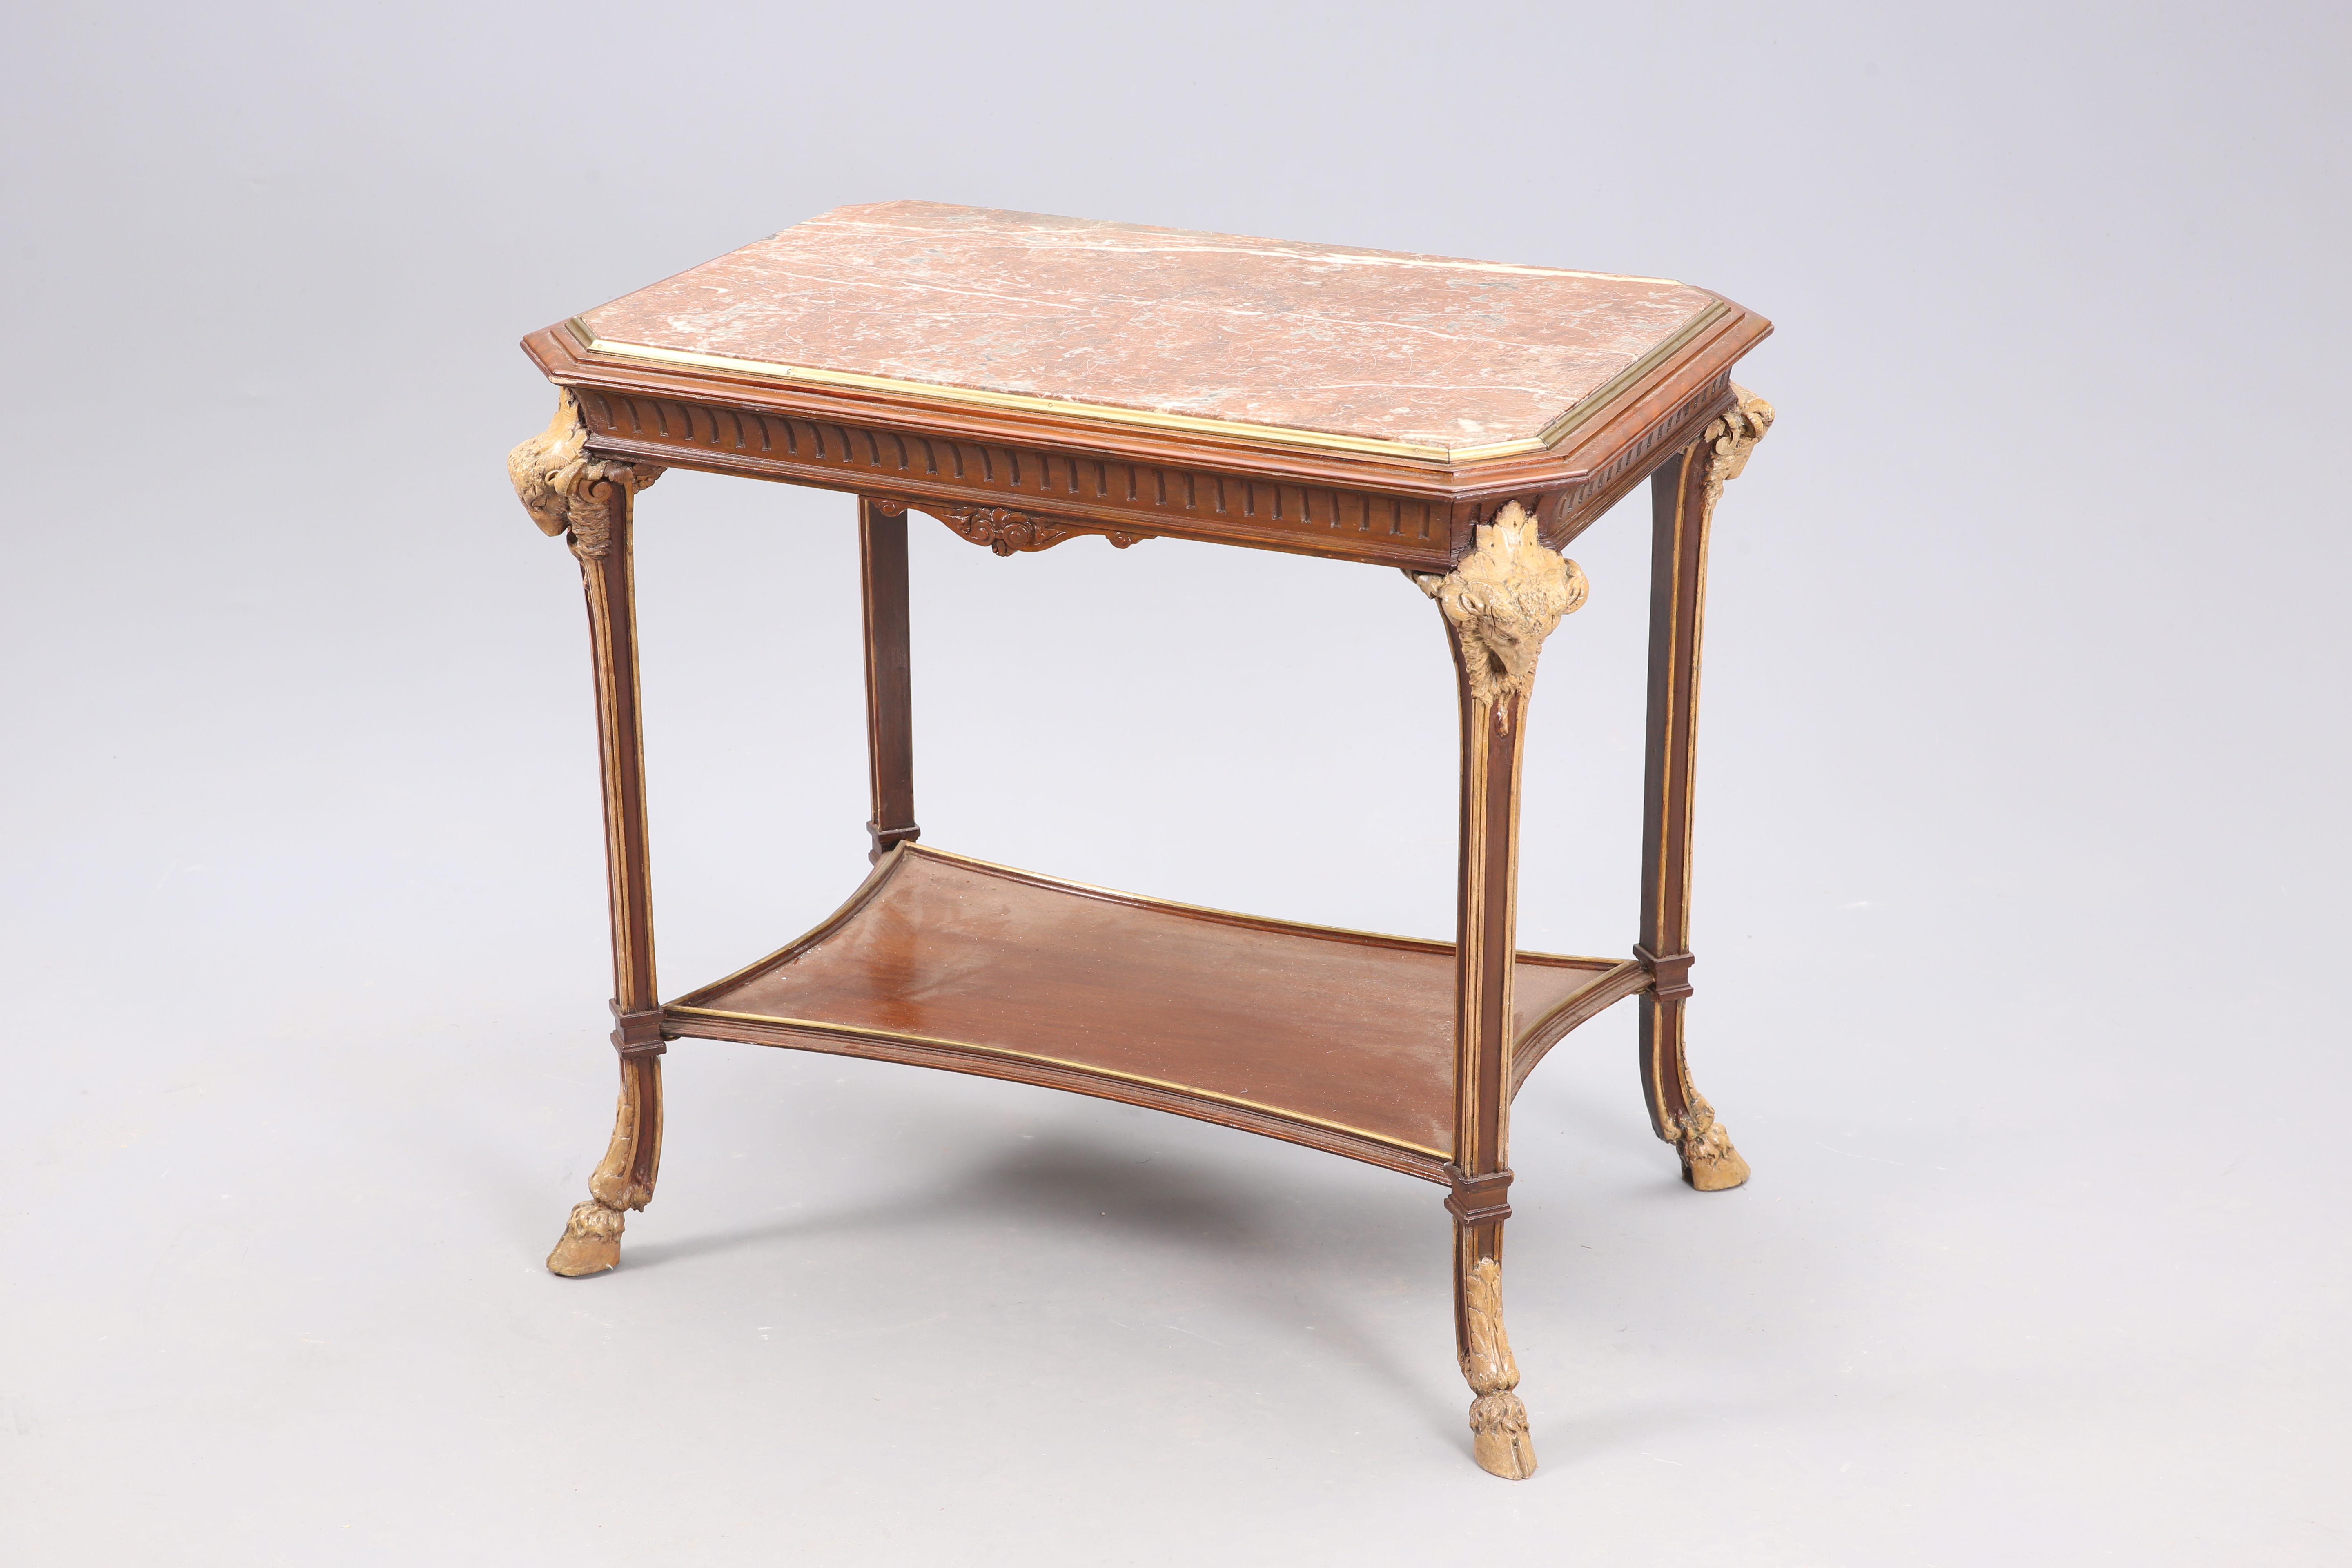 A 19TH CENTURY FRENCH MARBLE TOPPED SIDE TABLE